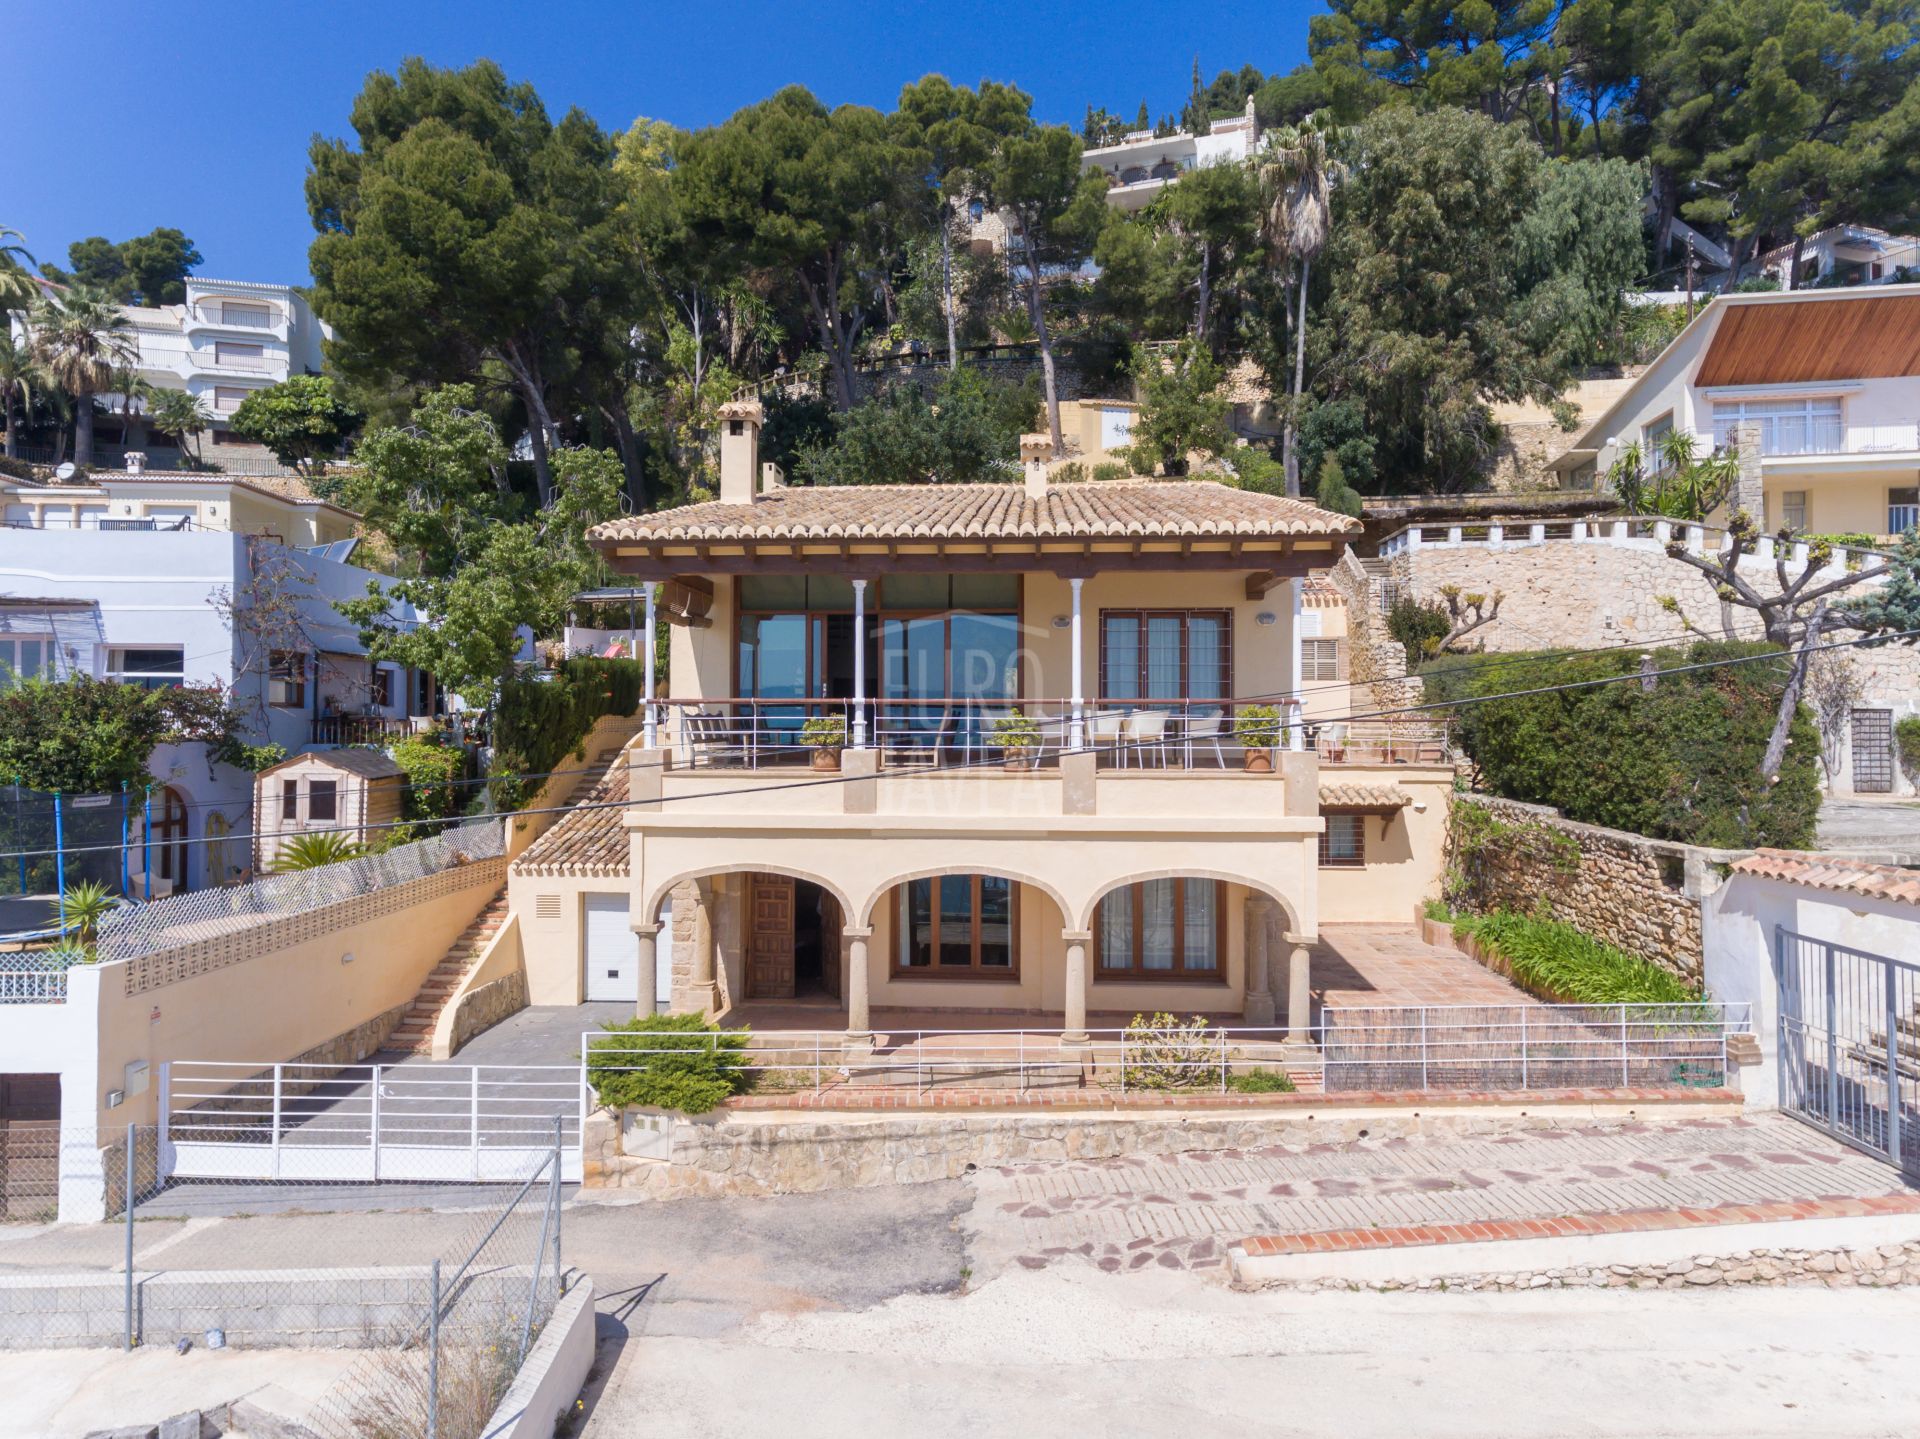 Villa for sale in the area of the Port of Jávea, with spectacular views of the sea and the Yacht Club